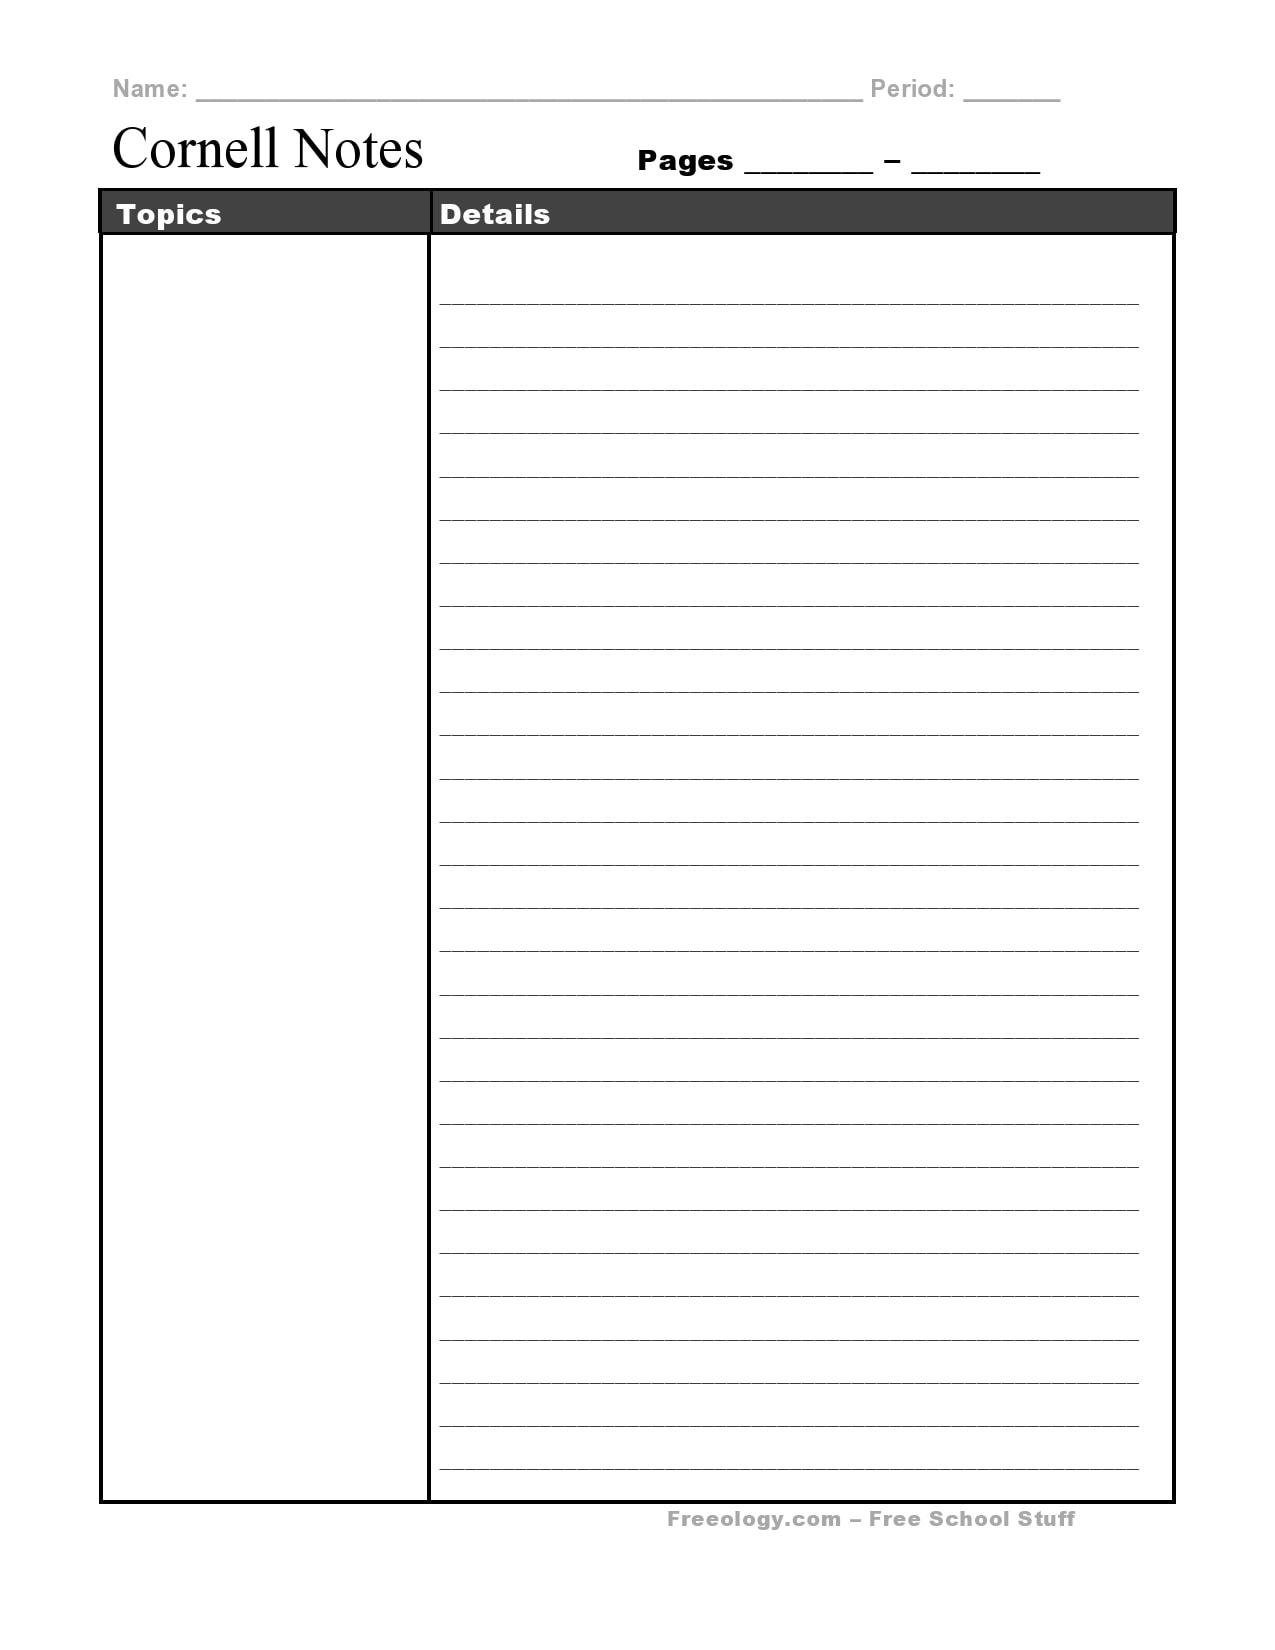 21 Printable Cornell Notes Templates [Free] - TemplateArchive Inside Notes Outline Template